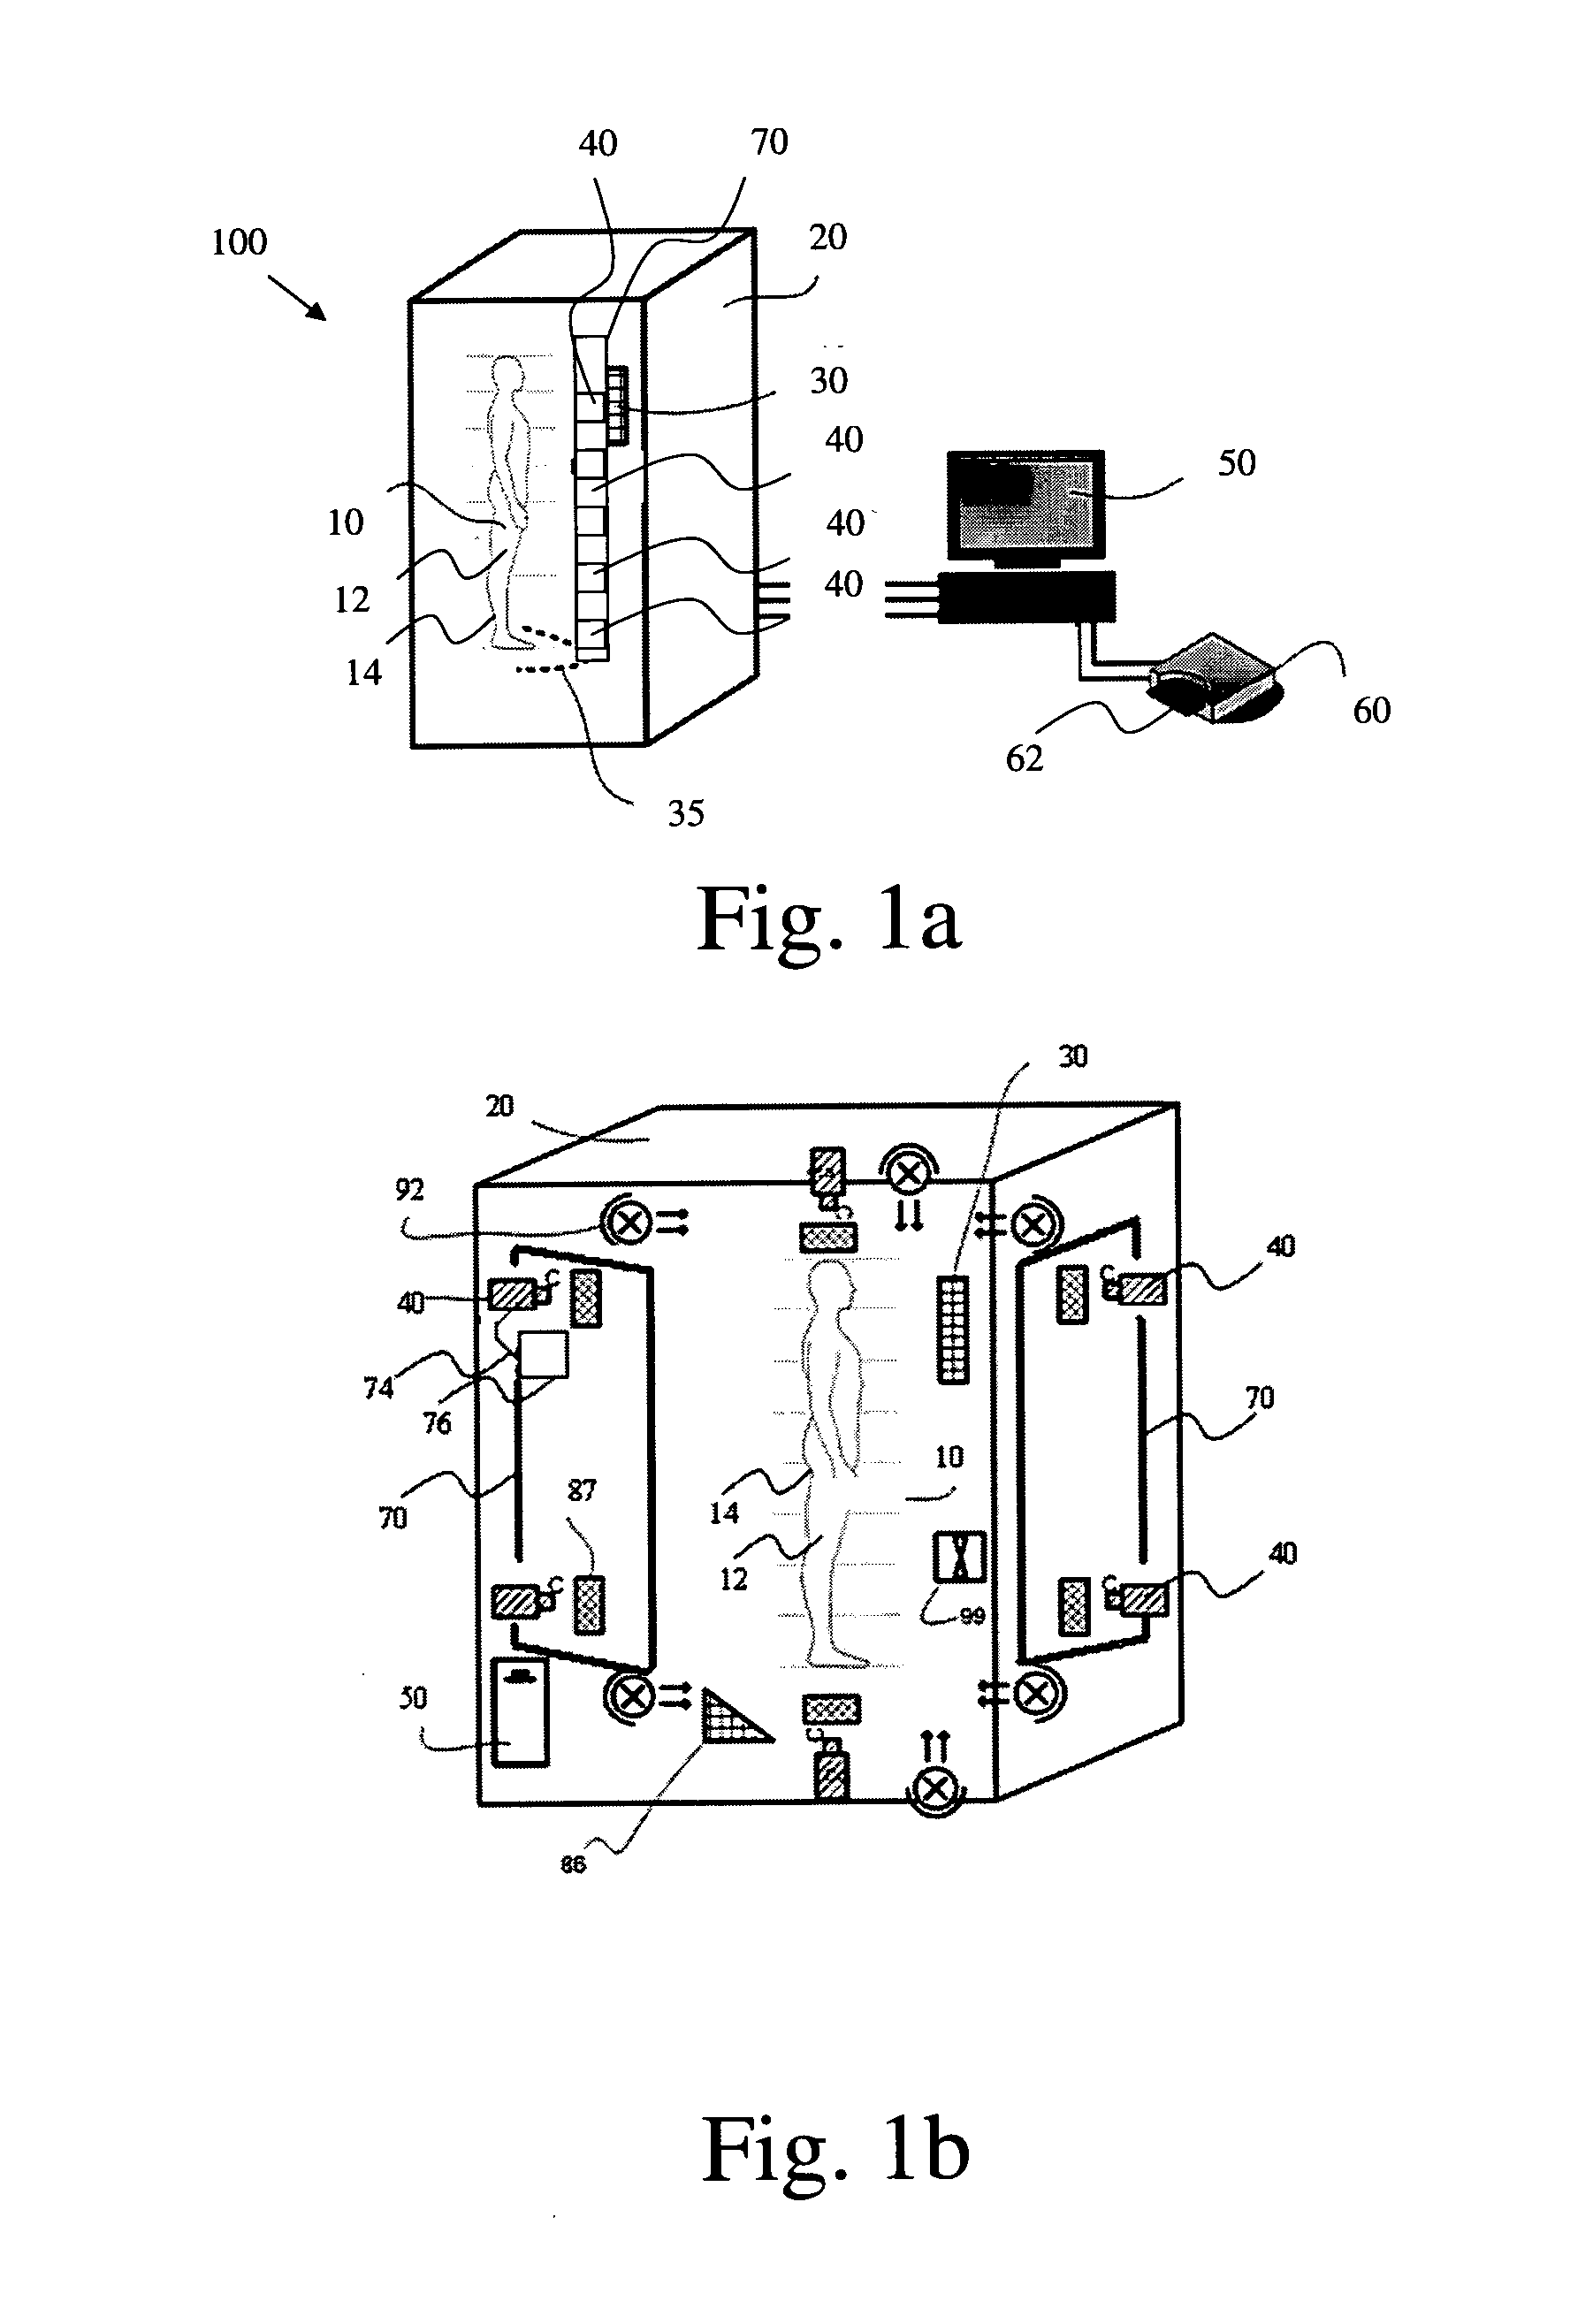 System and method for scanning a human body